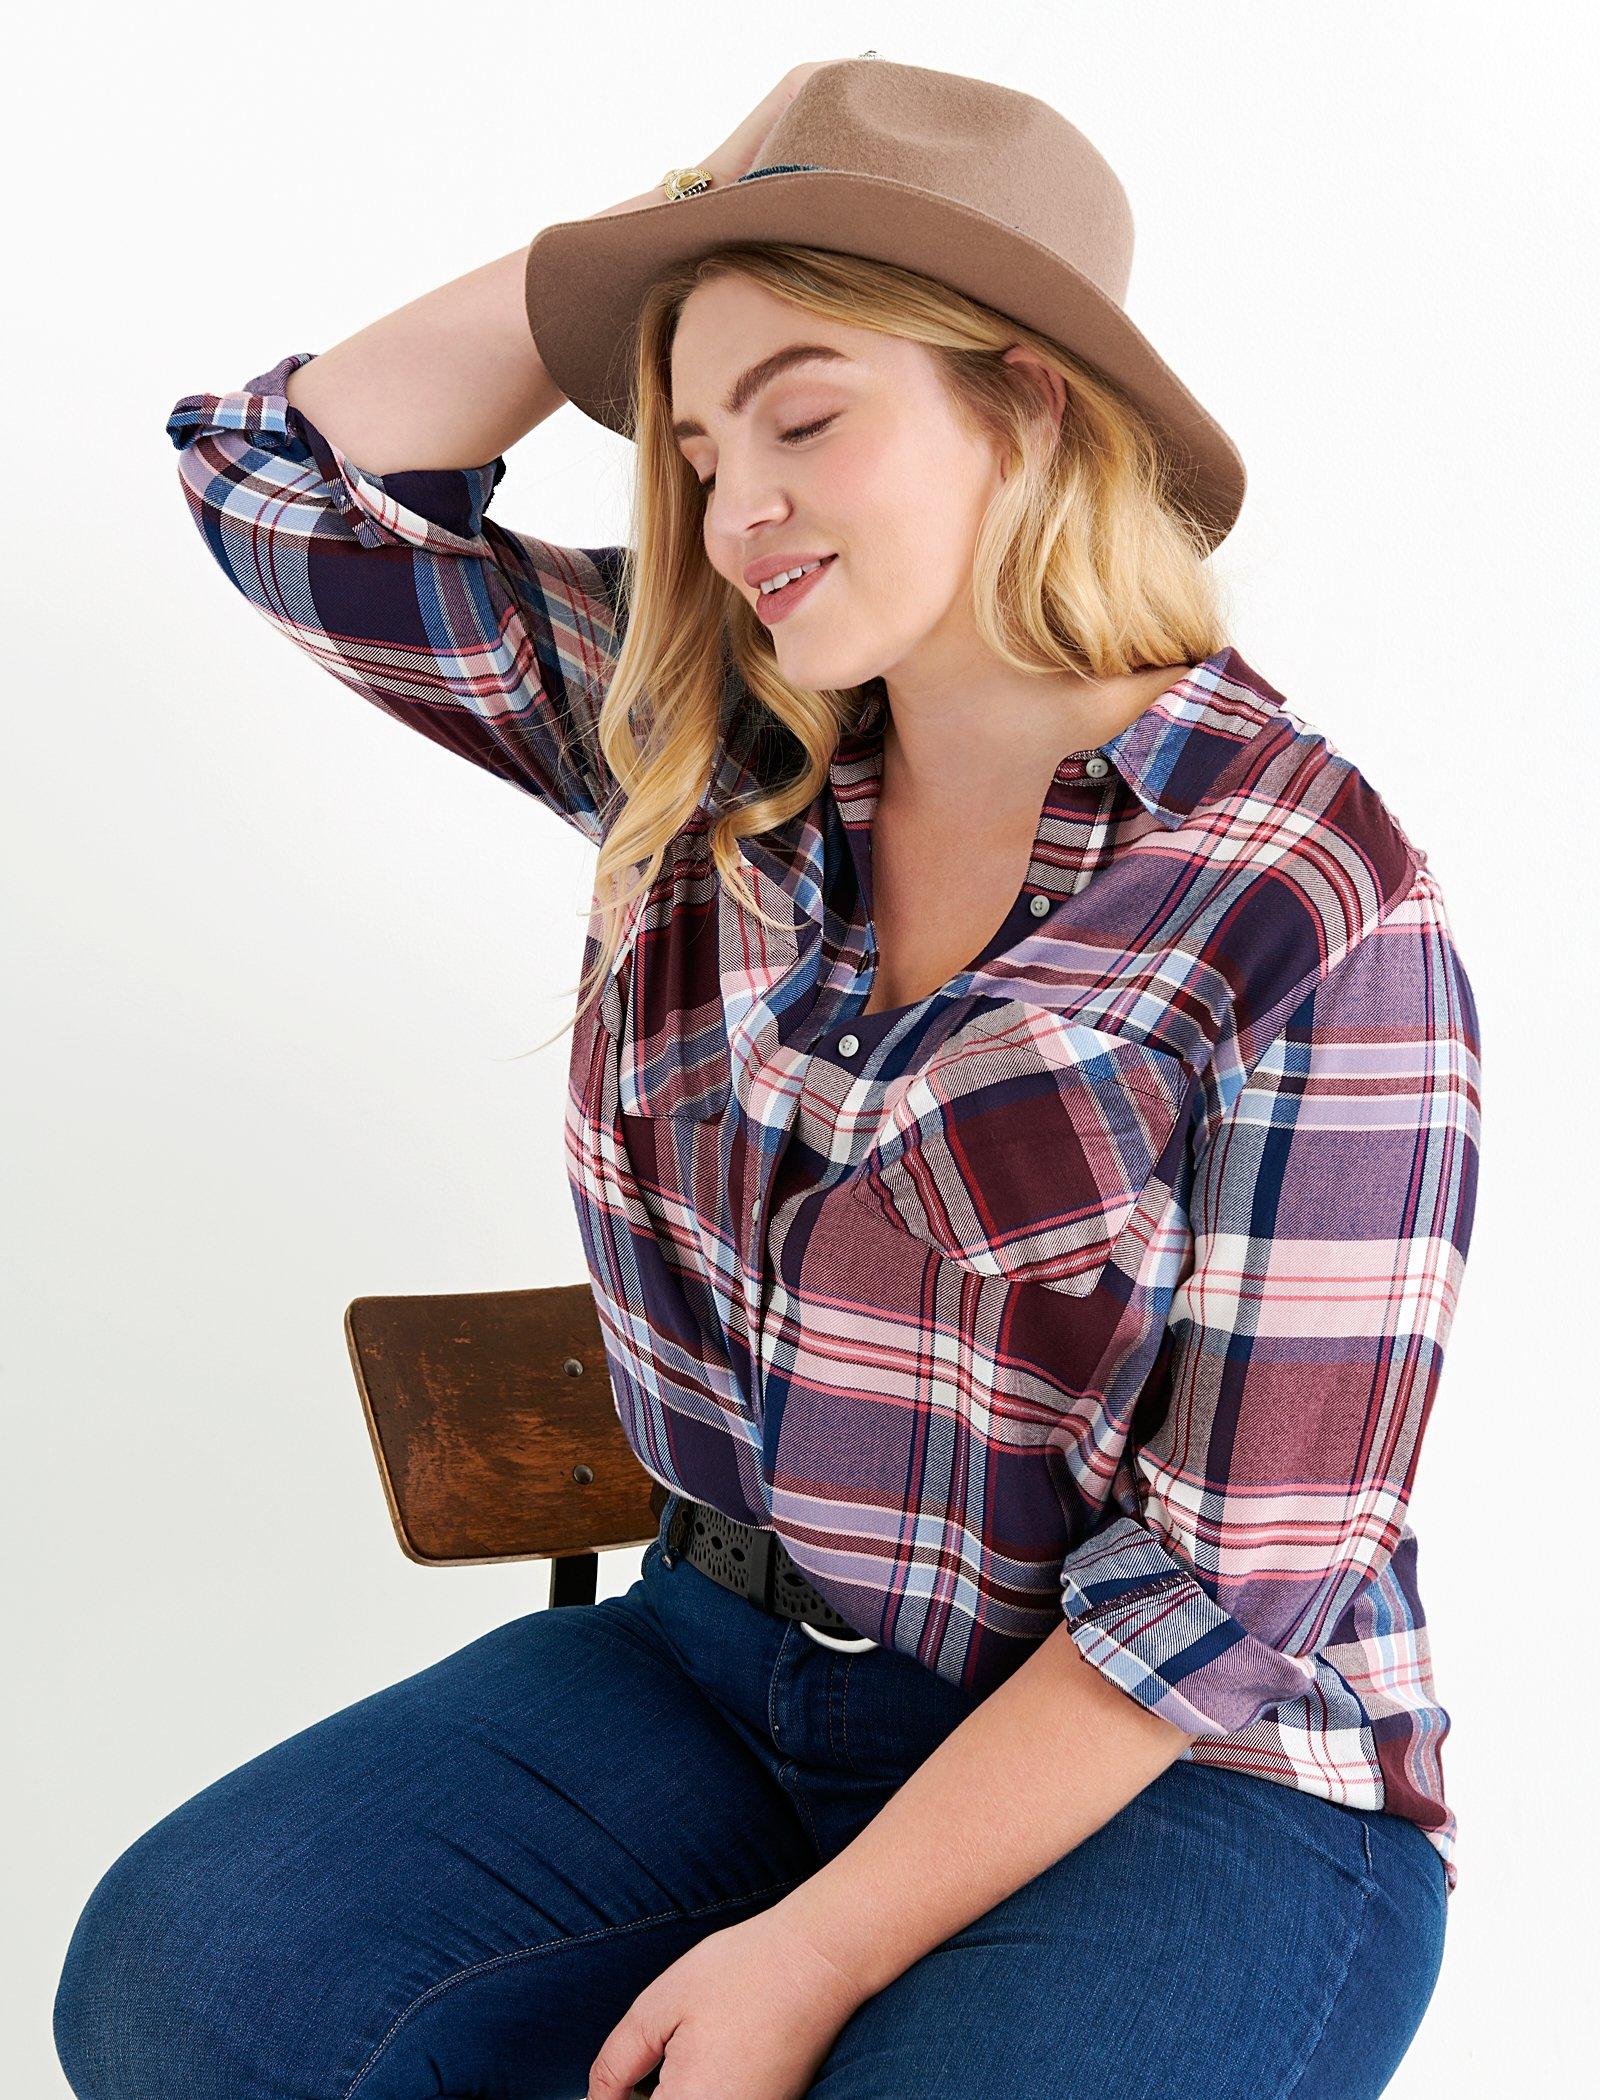 lucky brand plus size tops sale